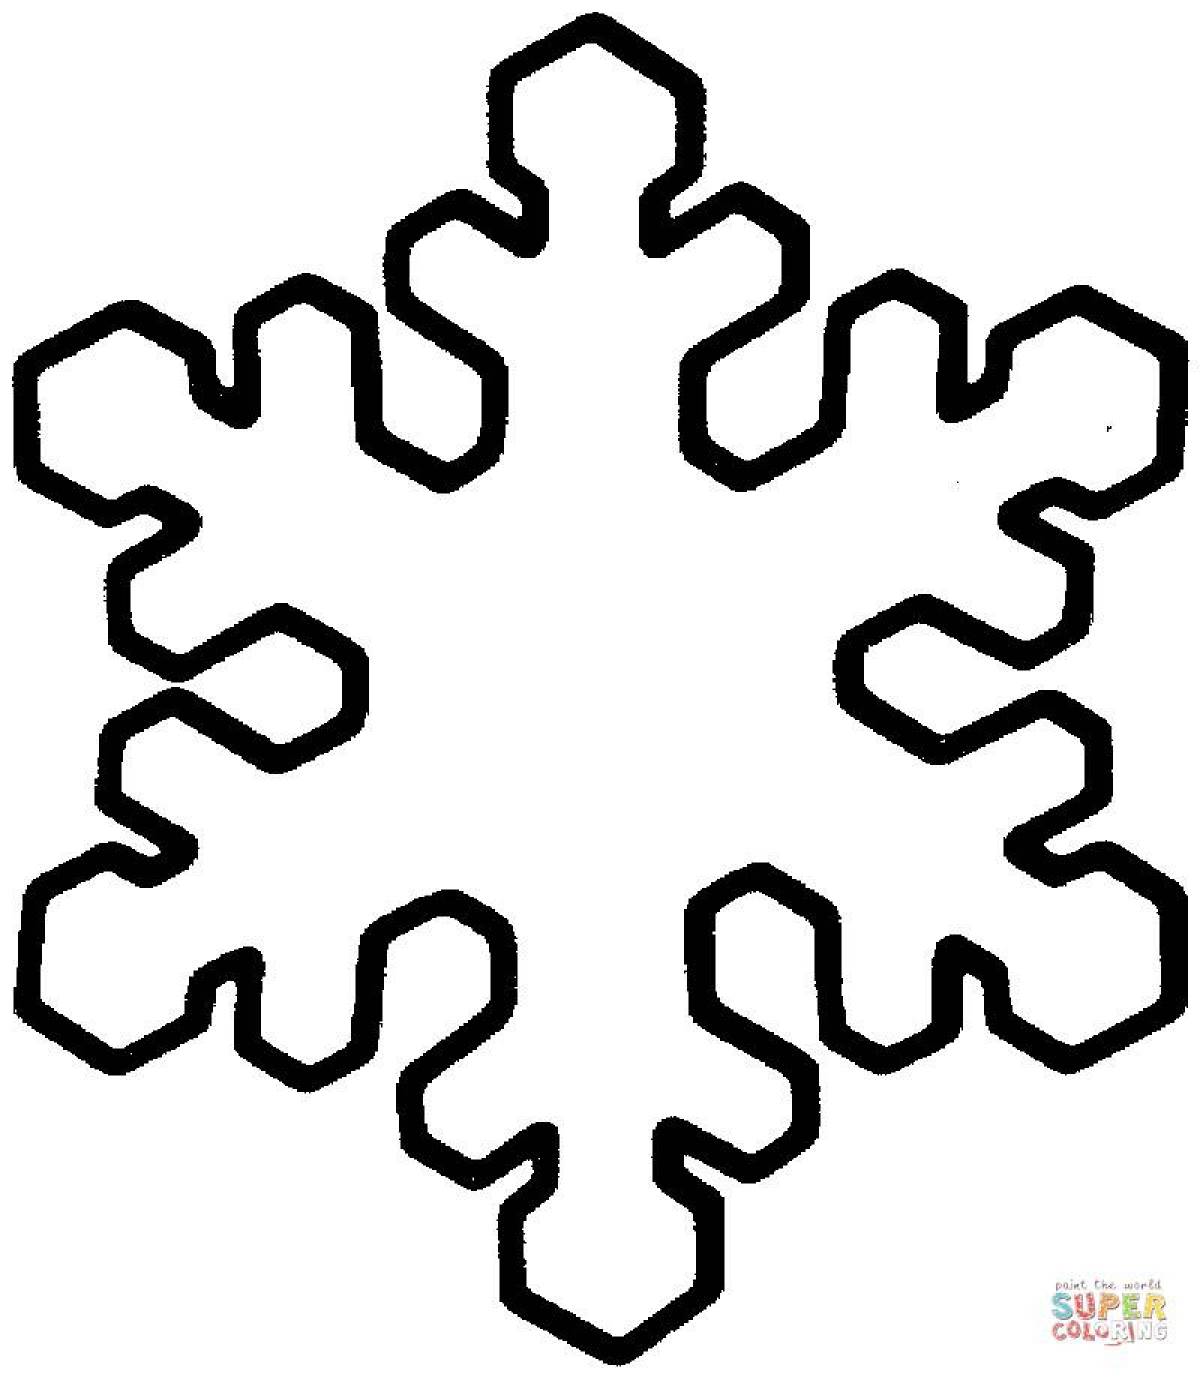 Playful snowflake coloring book for kids 5-6 years old